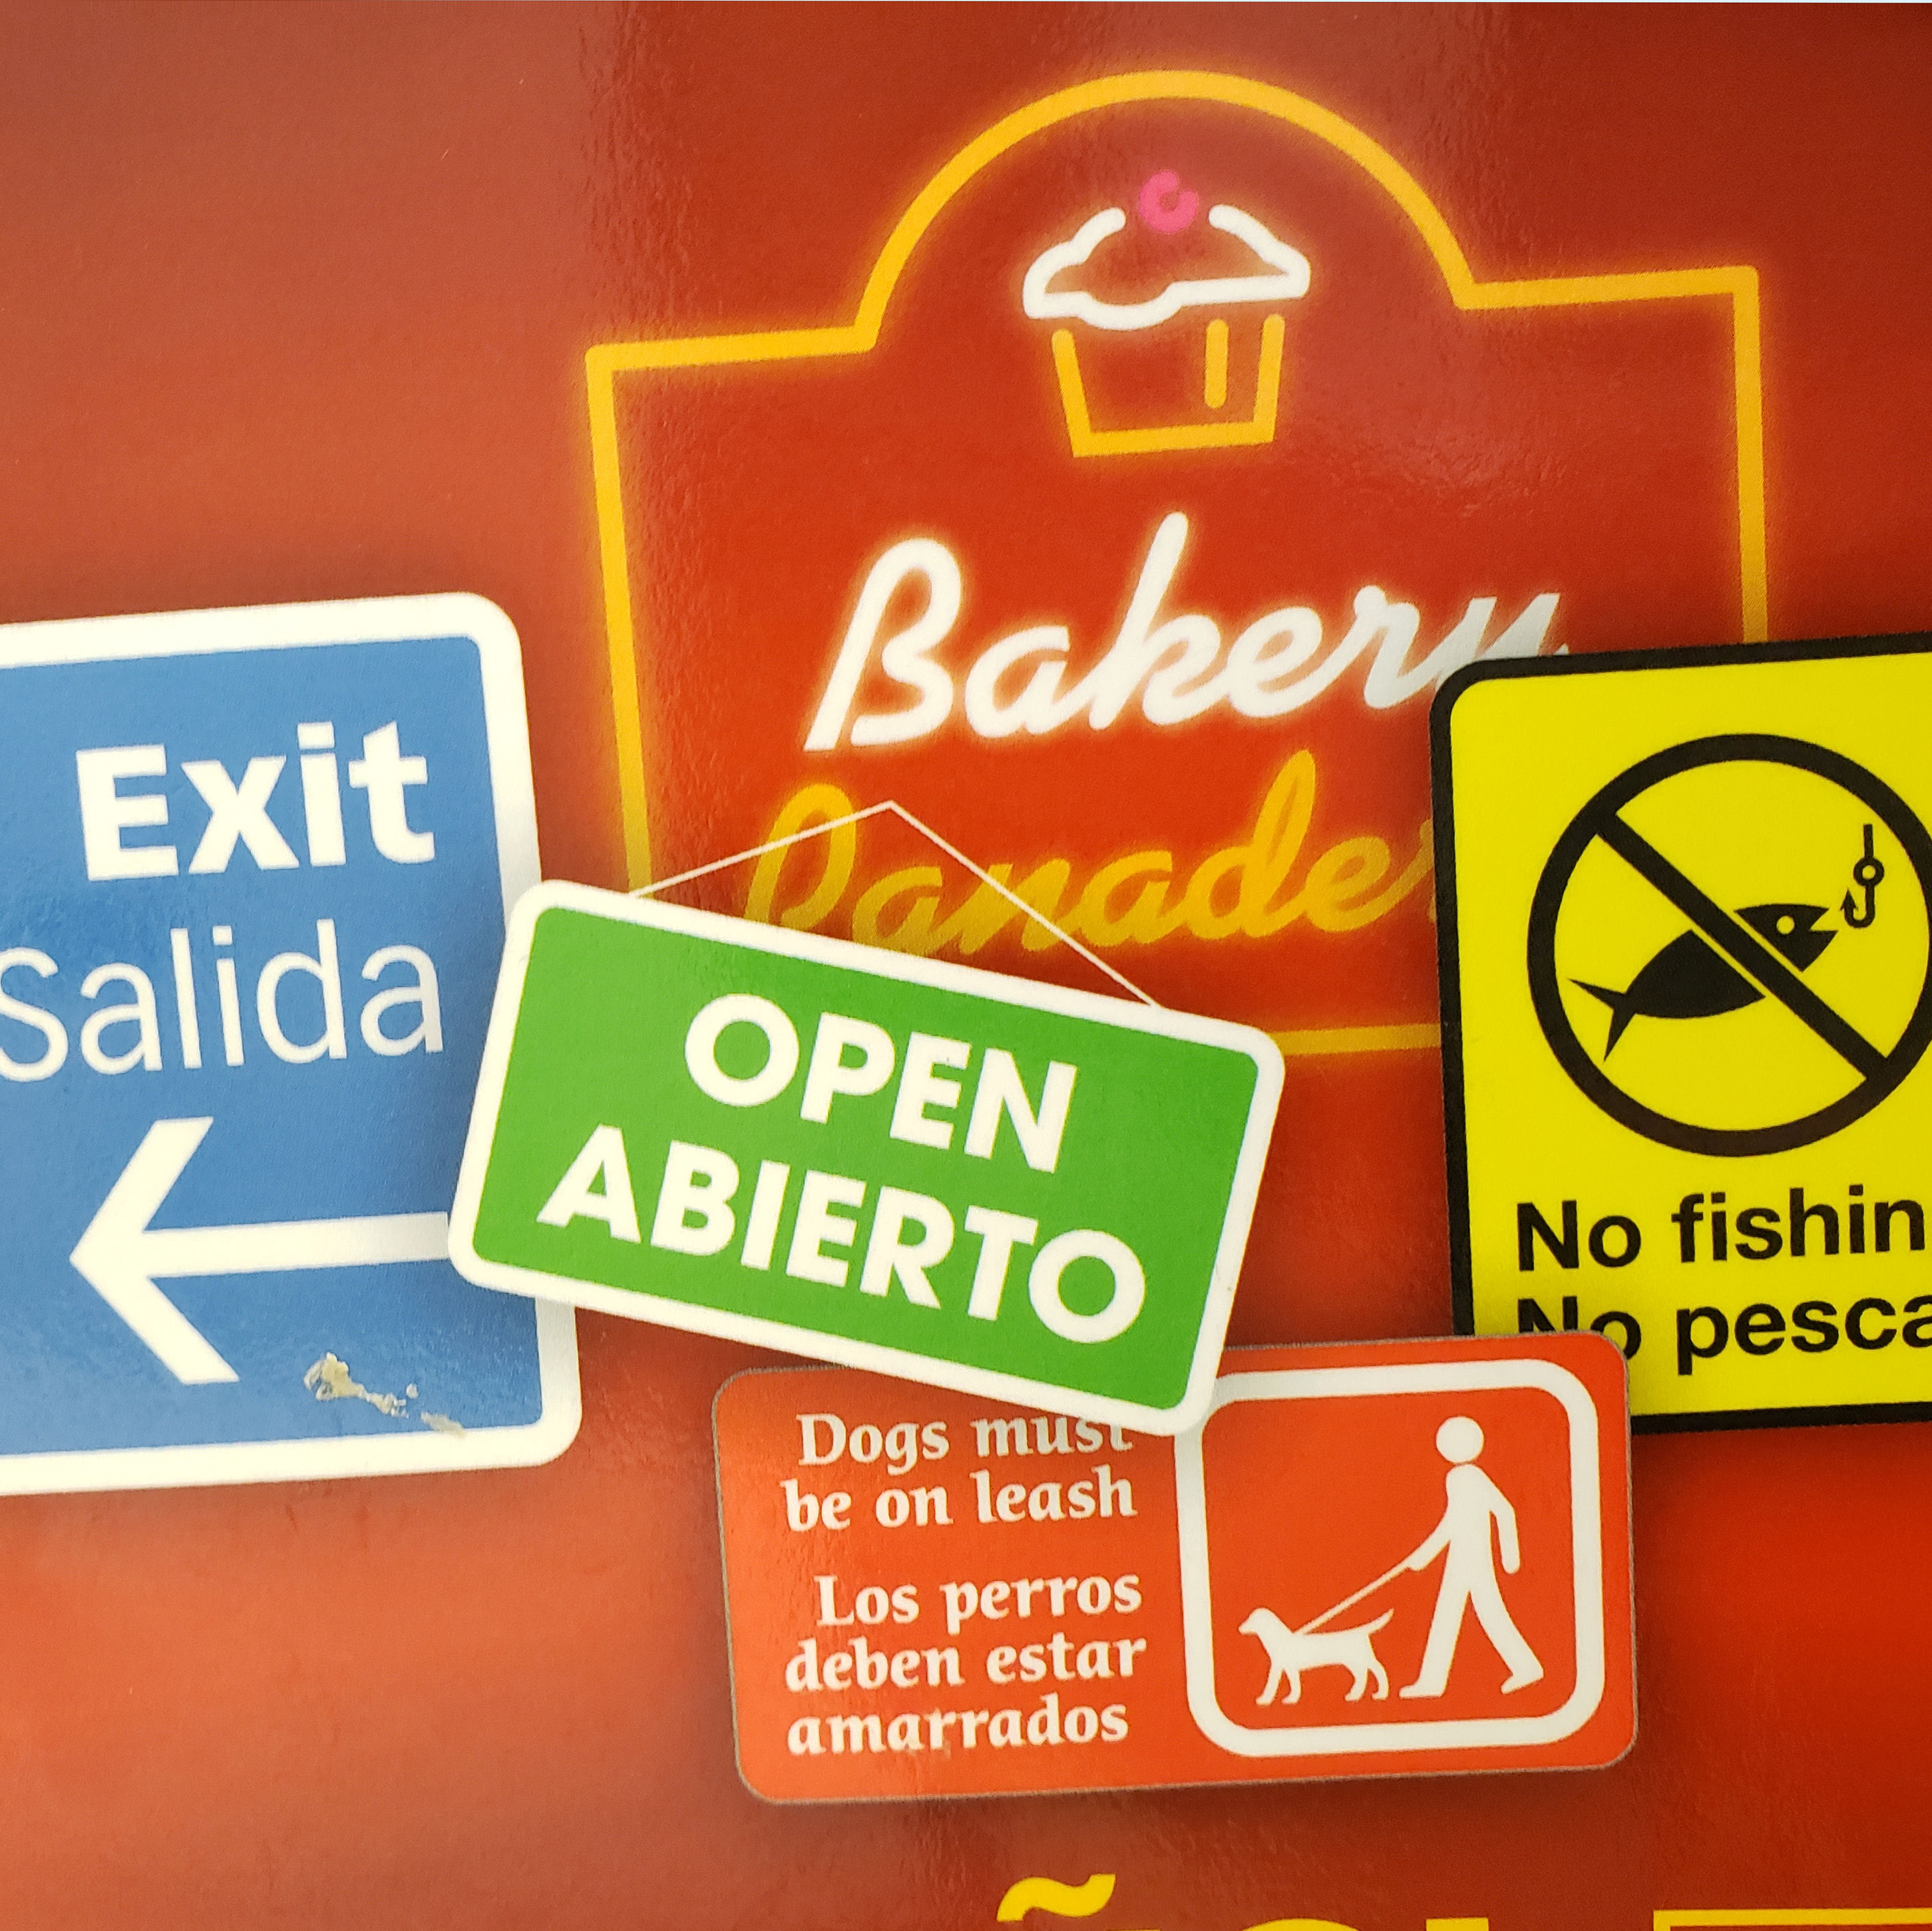 Image signs in Spanish